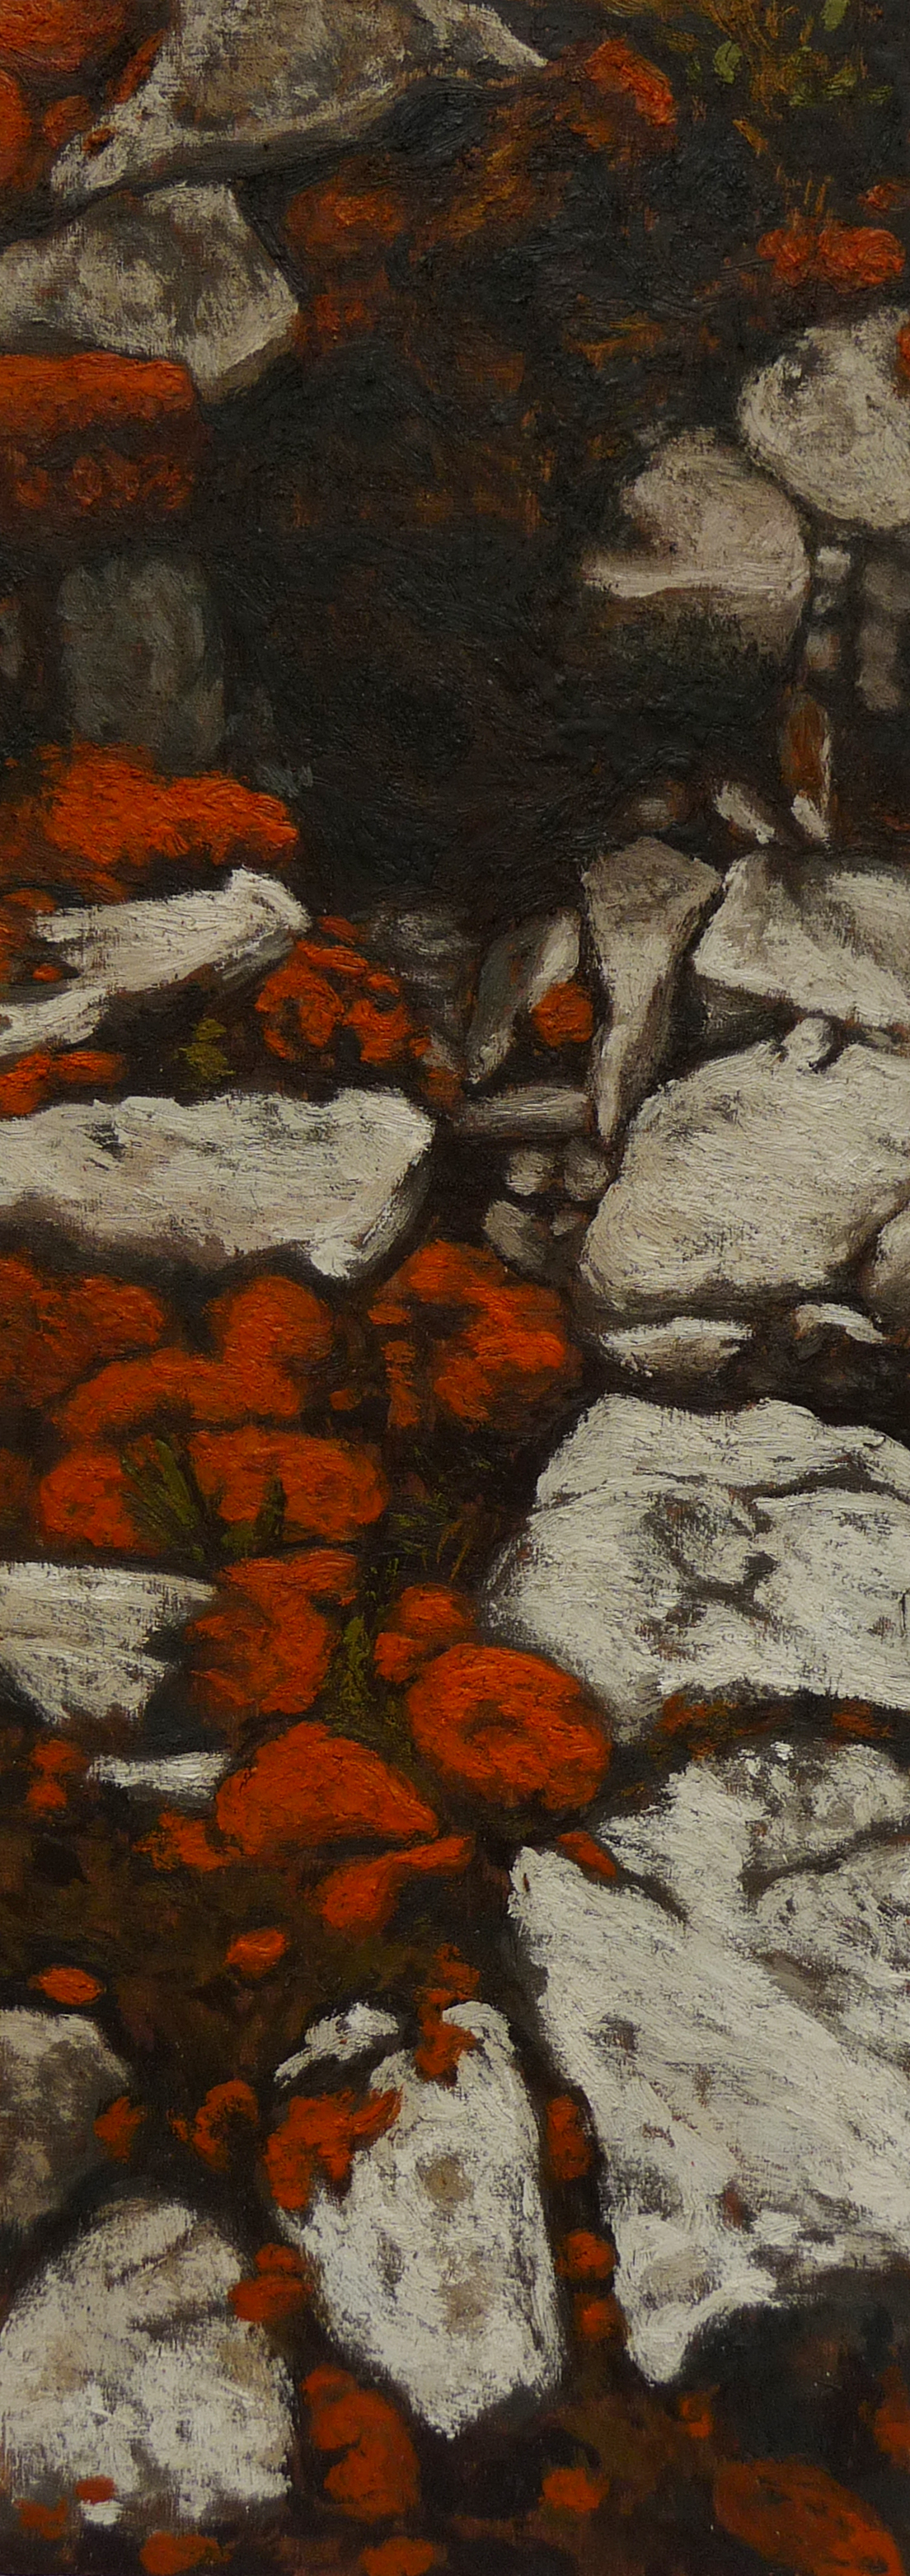 <p><strong>Orange moss 2            SOLD</strong><br />Encaustic on wood, 35 x 12,5 cm</p>